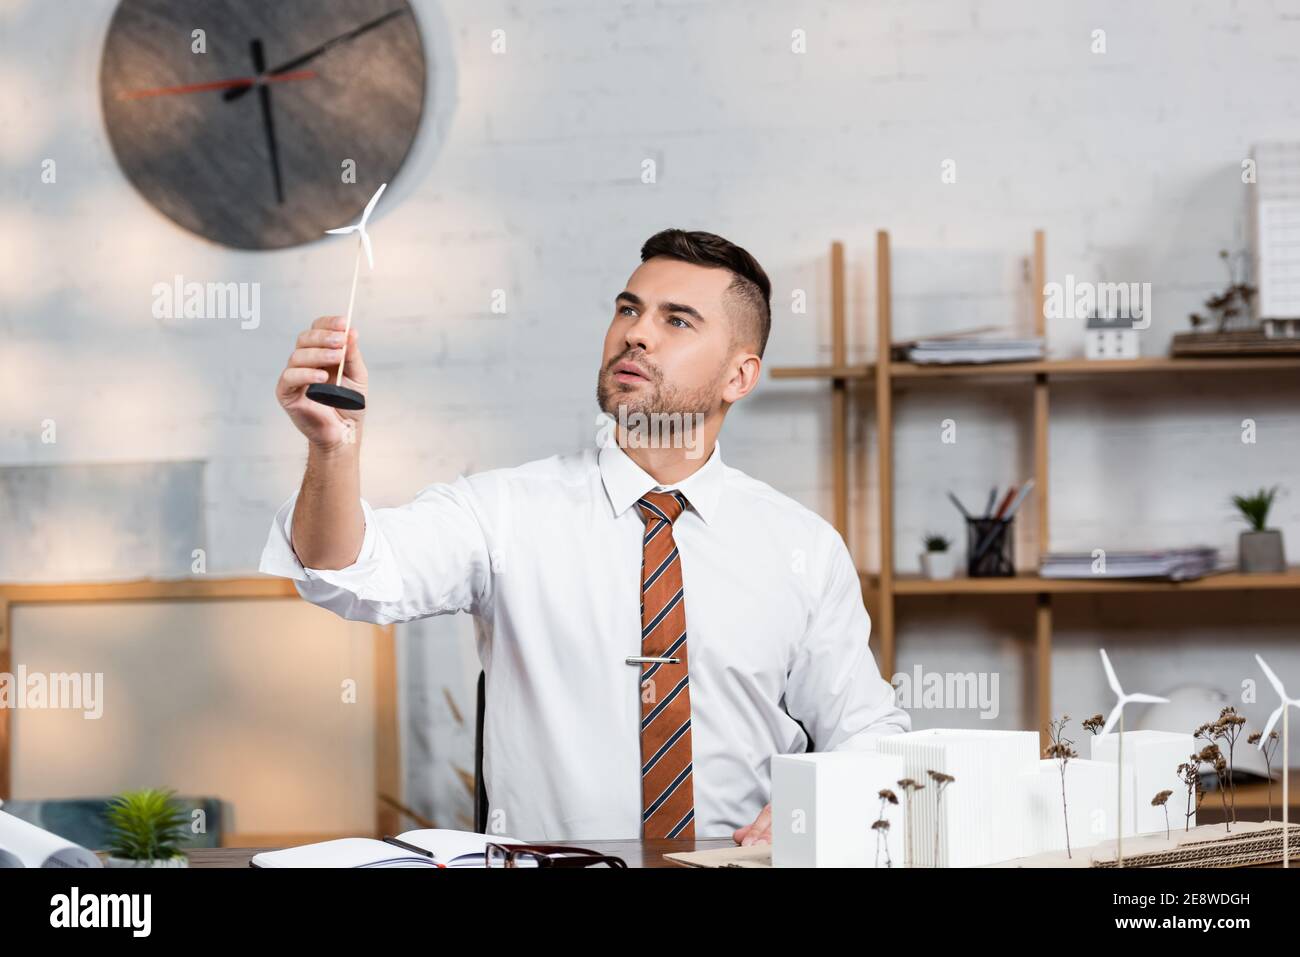 architect holding model of wind generator near architectural project at workplace Stock Photo